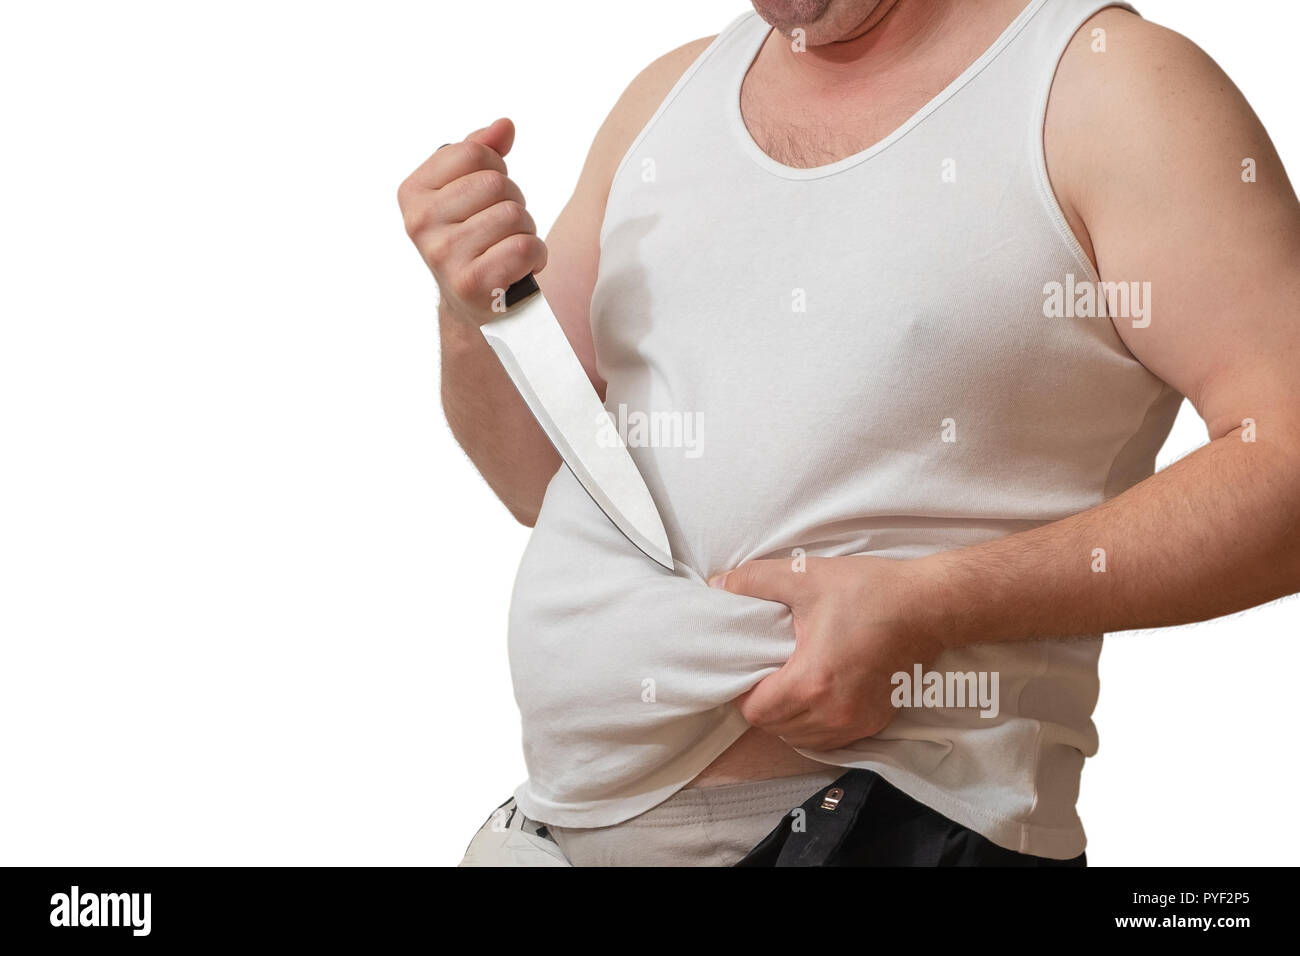 A man with one hand holds the fat fold on his big belly, and in the other hand holds a knife, as if wanting to remove it. Stock Photo